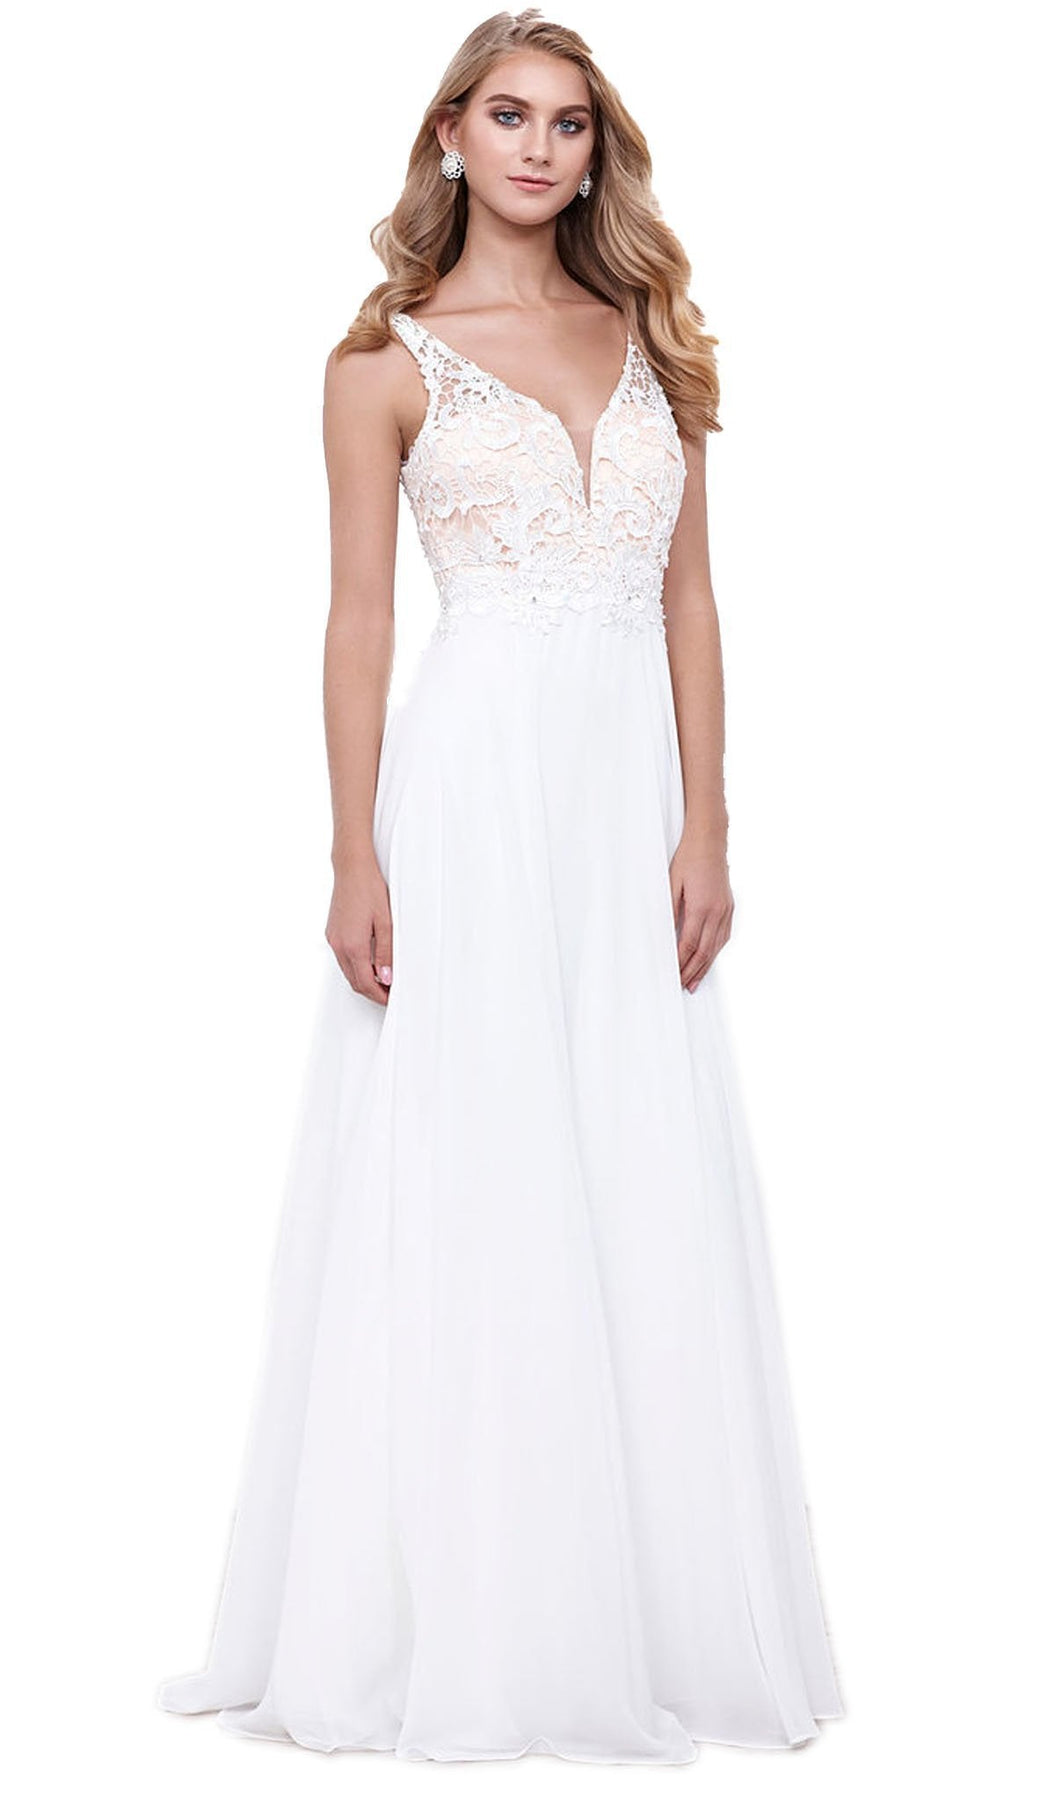 Nox Anabel - 8297 Sleeveless Lace Bodice A-Line Evening Dress Special Occasion Dress XS / White